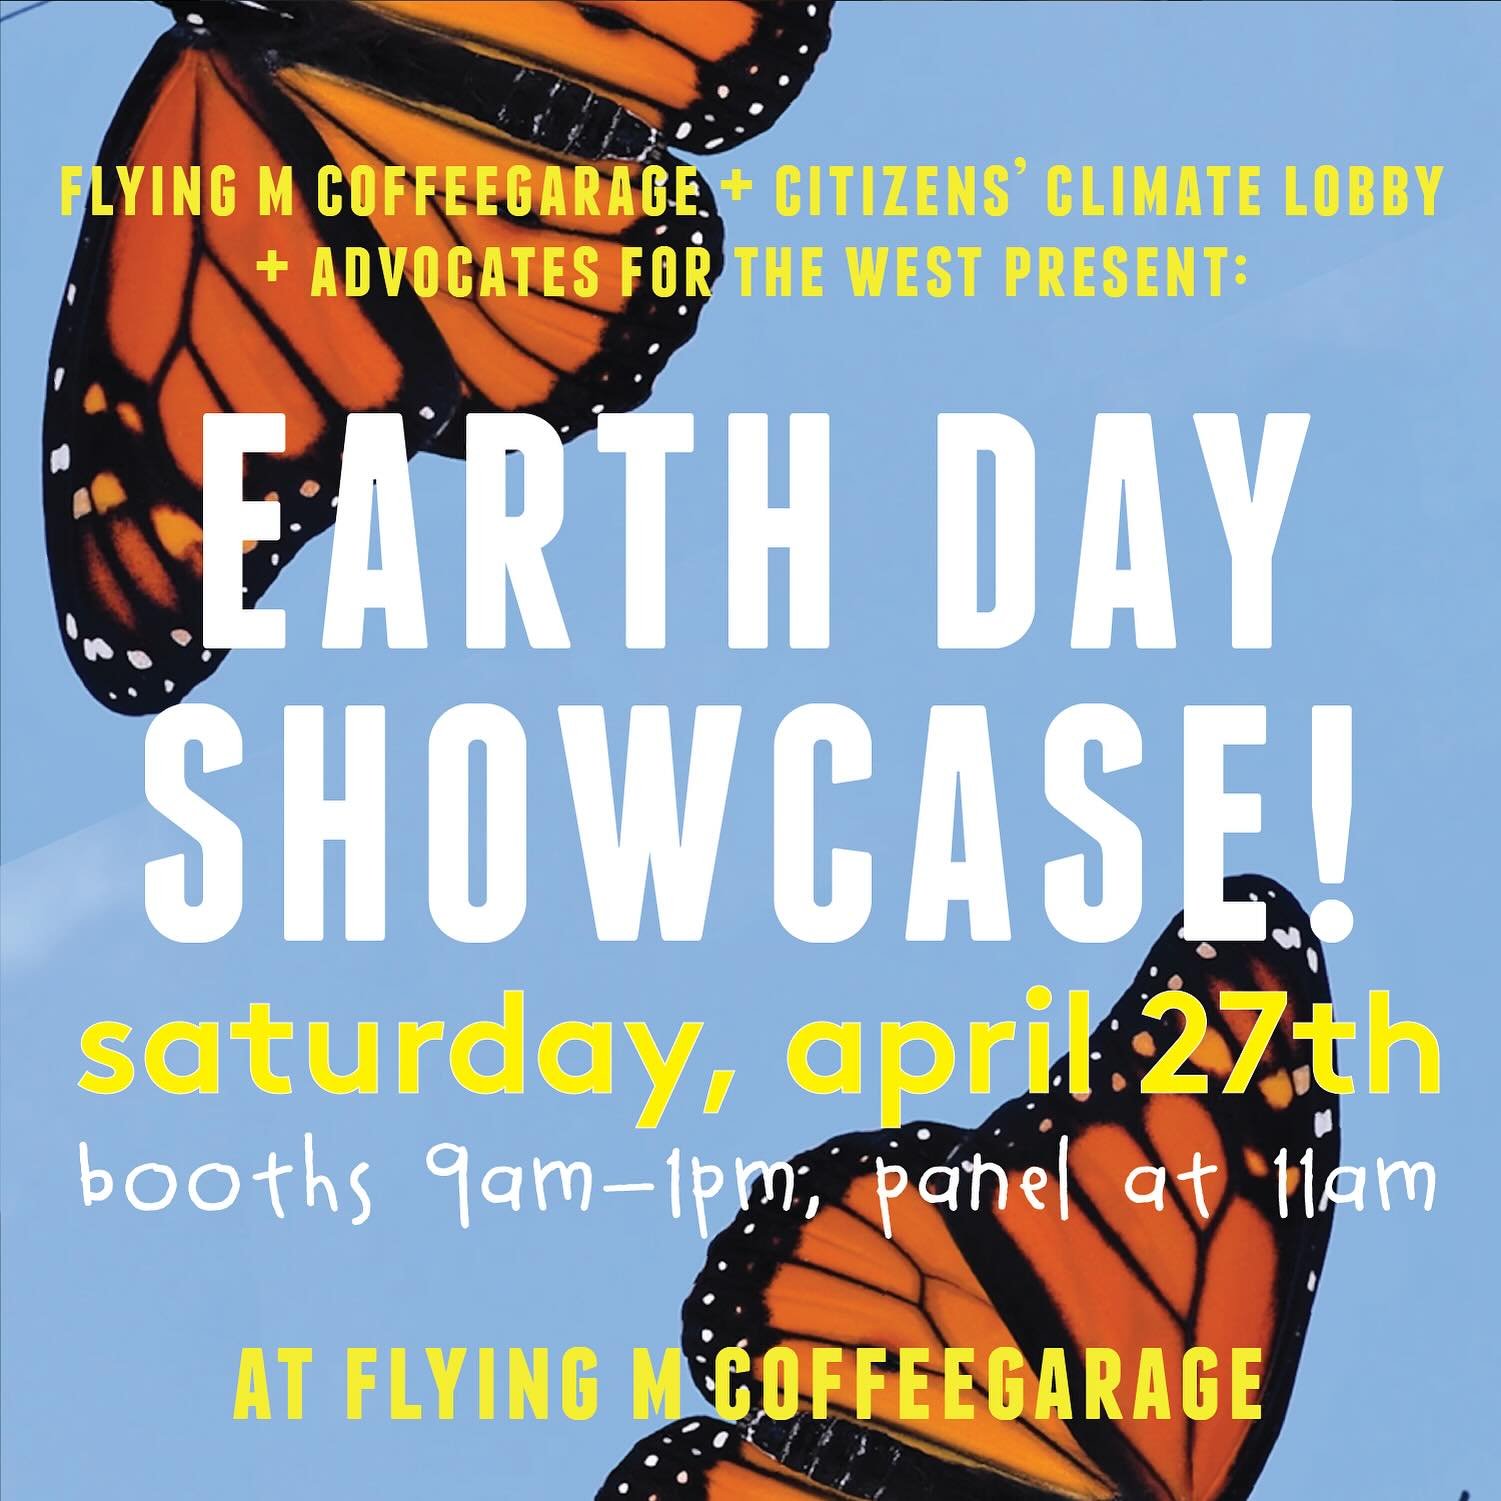 We&rsquo;re celebrating Earth Day THIS Saturday with a fun-for-the-whole-fam showcase on our patio and in our sparkly new garage space! Come down to plant a seed, recycle your lithium batteries, hear from Treasure Valley conservation experts, and mor